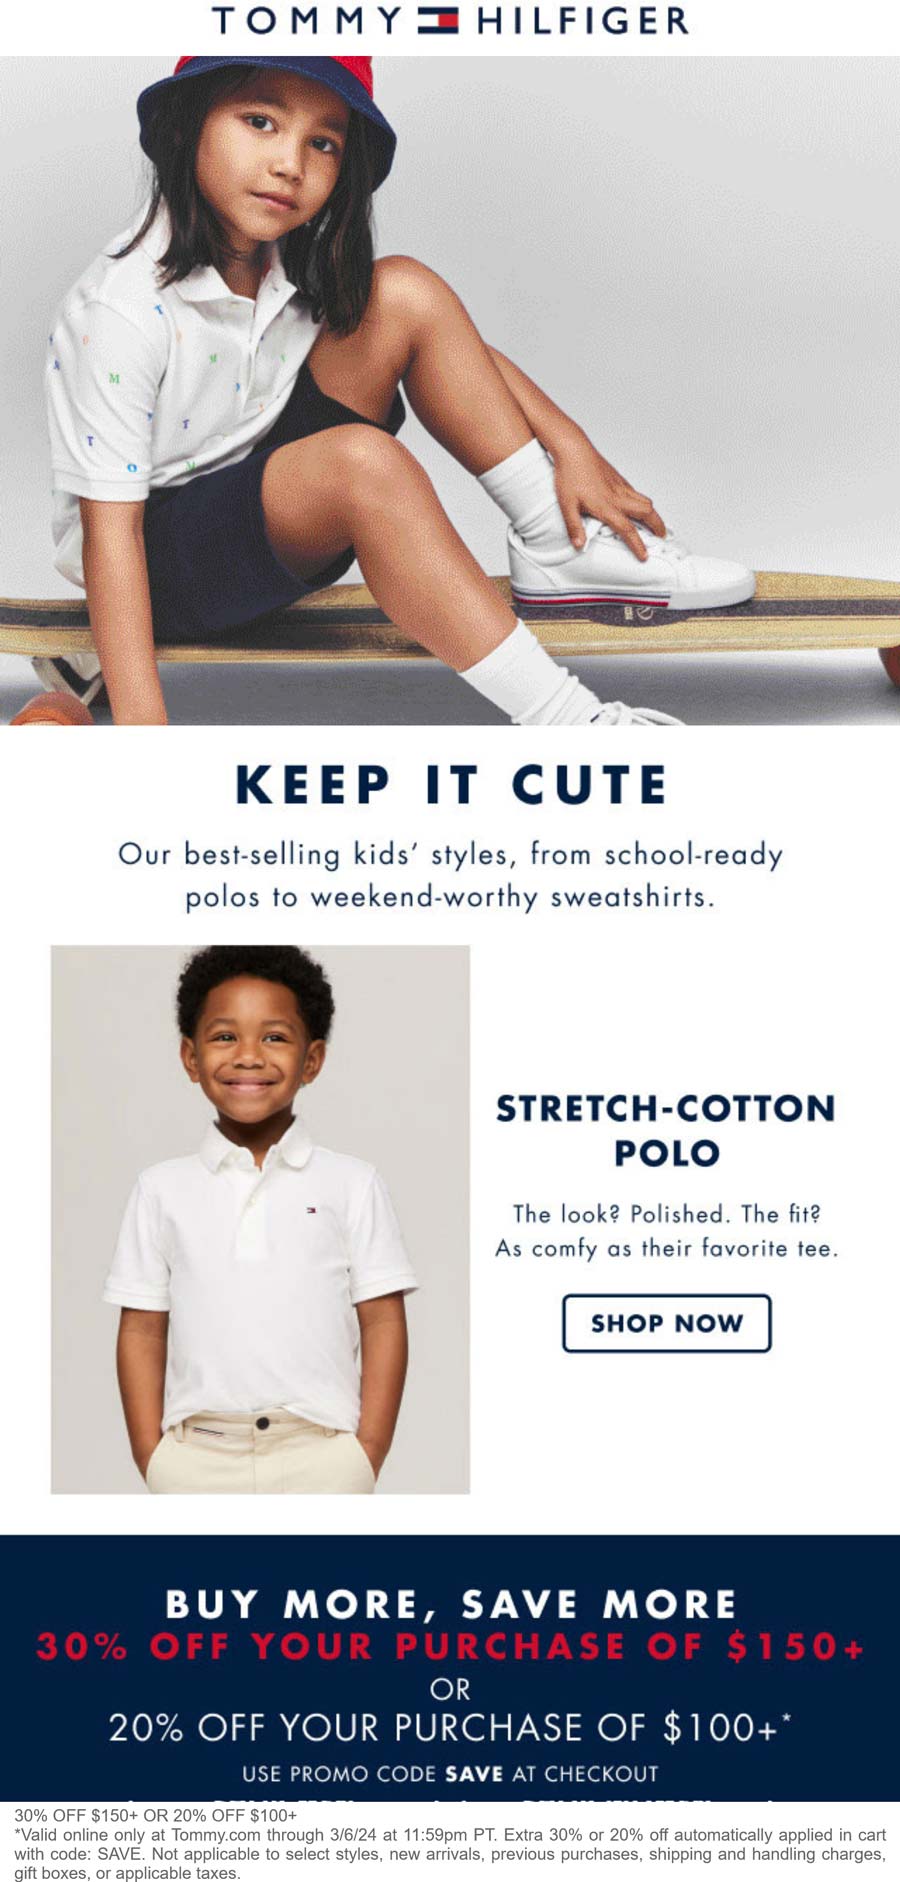 Tommy Hilfiger stores Coupon  20-30% off $100+ online at Tommy Hilfiger via promo code SAVE #tommyhilfiger 